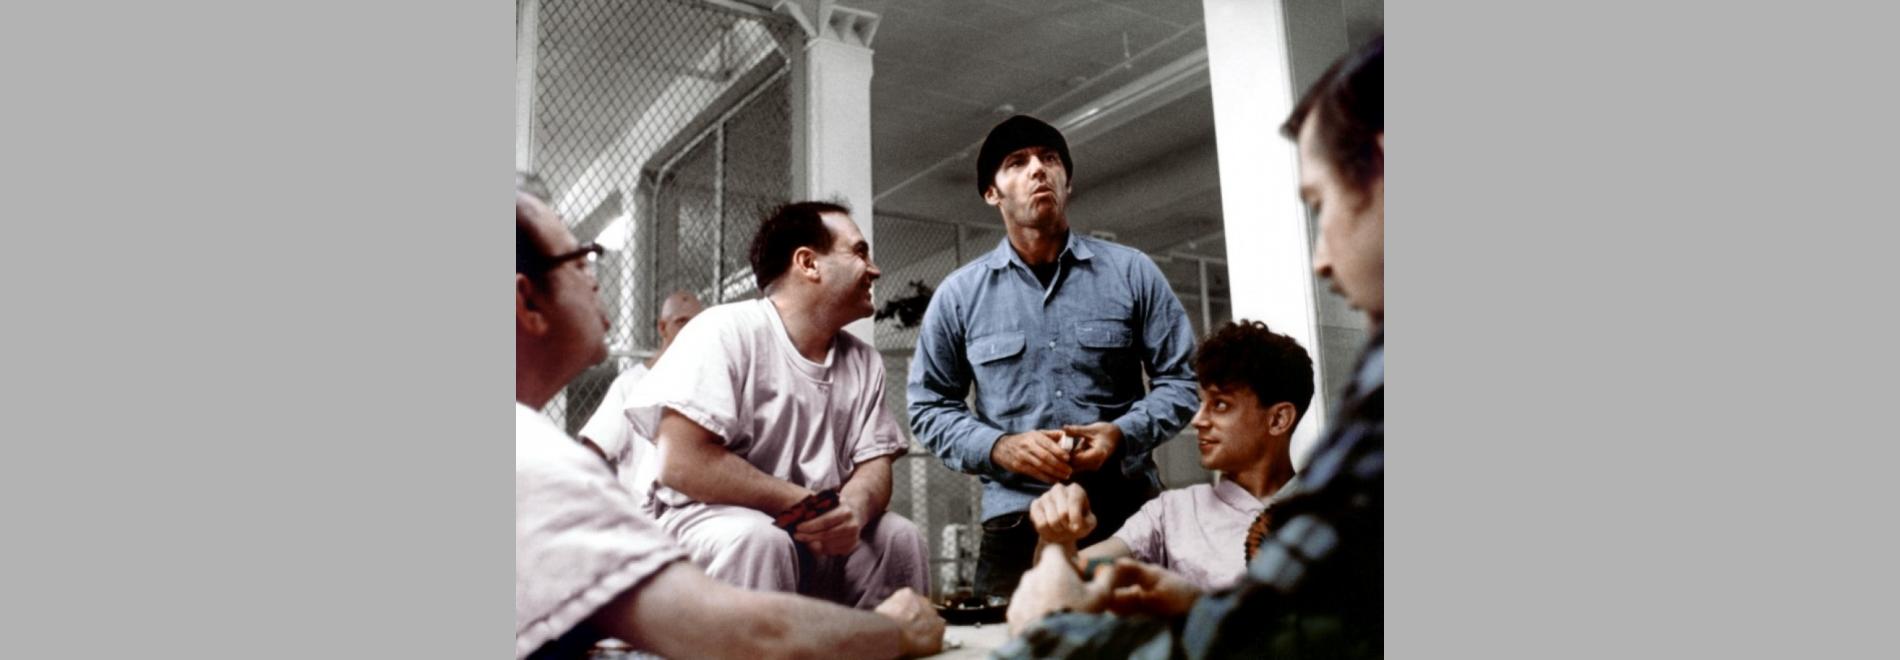 One Flew over the Cuckoo’s Nest